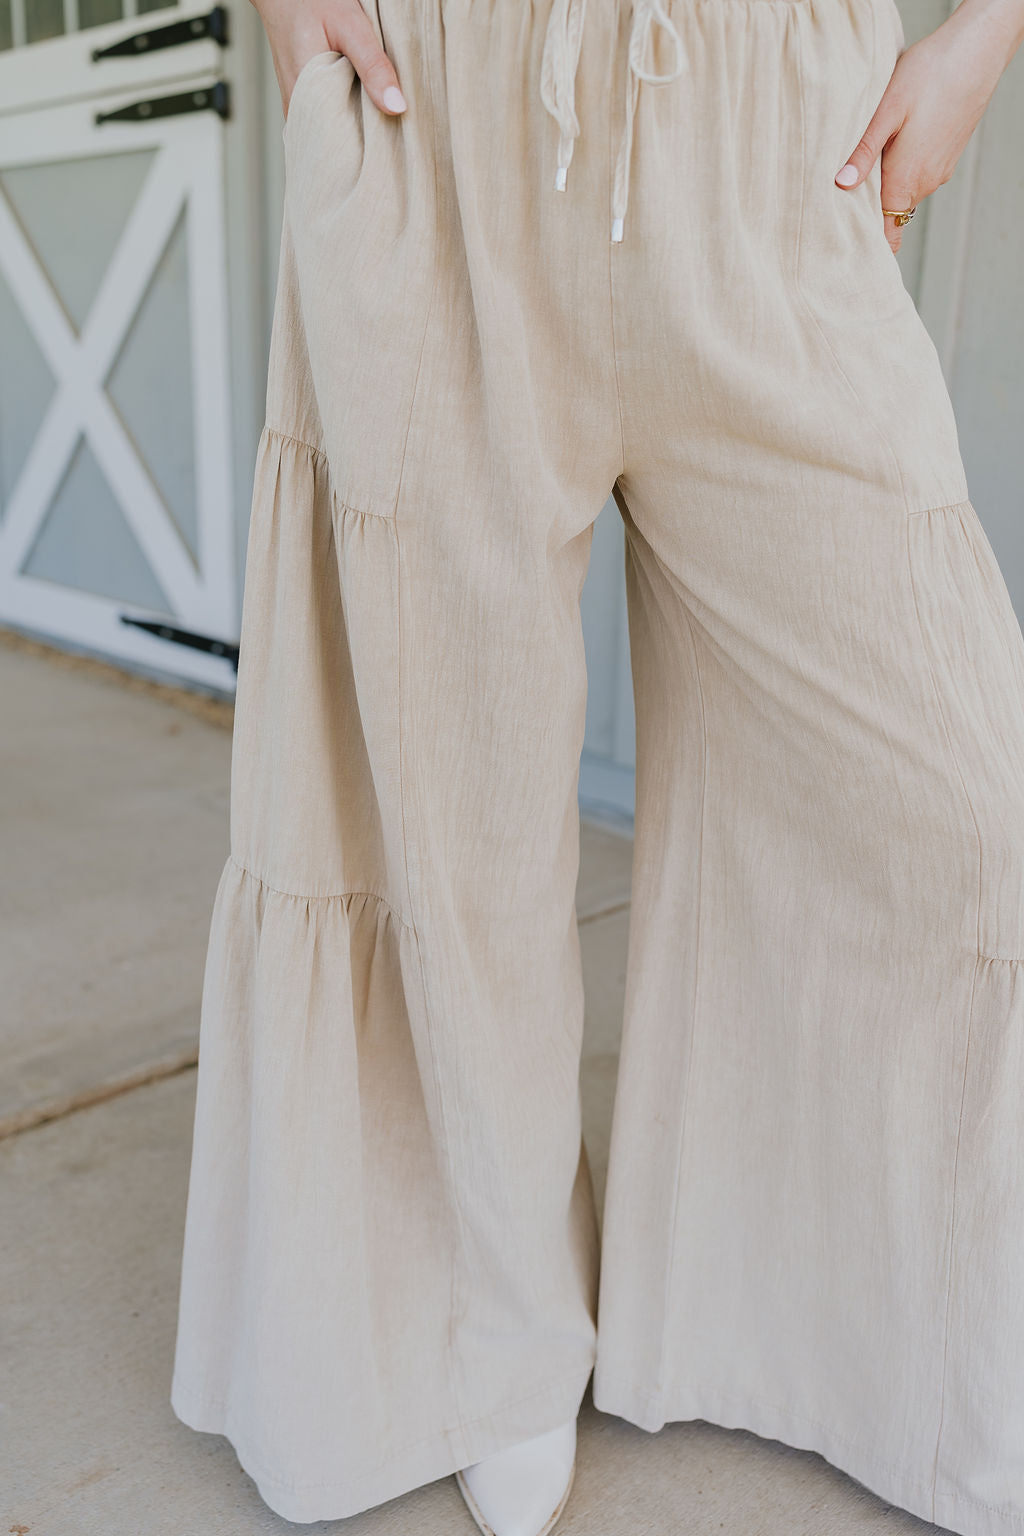 Close up front view of female model wearing the Carissa Washed Taupe Tiered Flare Pants which features Washed Taupe Cotton Fabric, Side Tiered Design, Flare Pants, Elastic Waistband with Drawstring Tie and Side Pockets